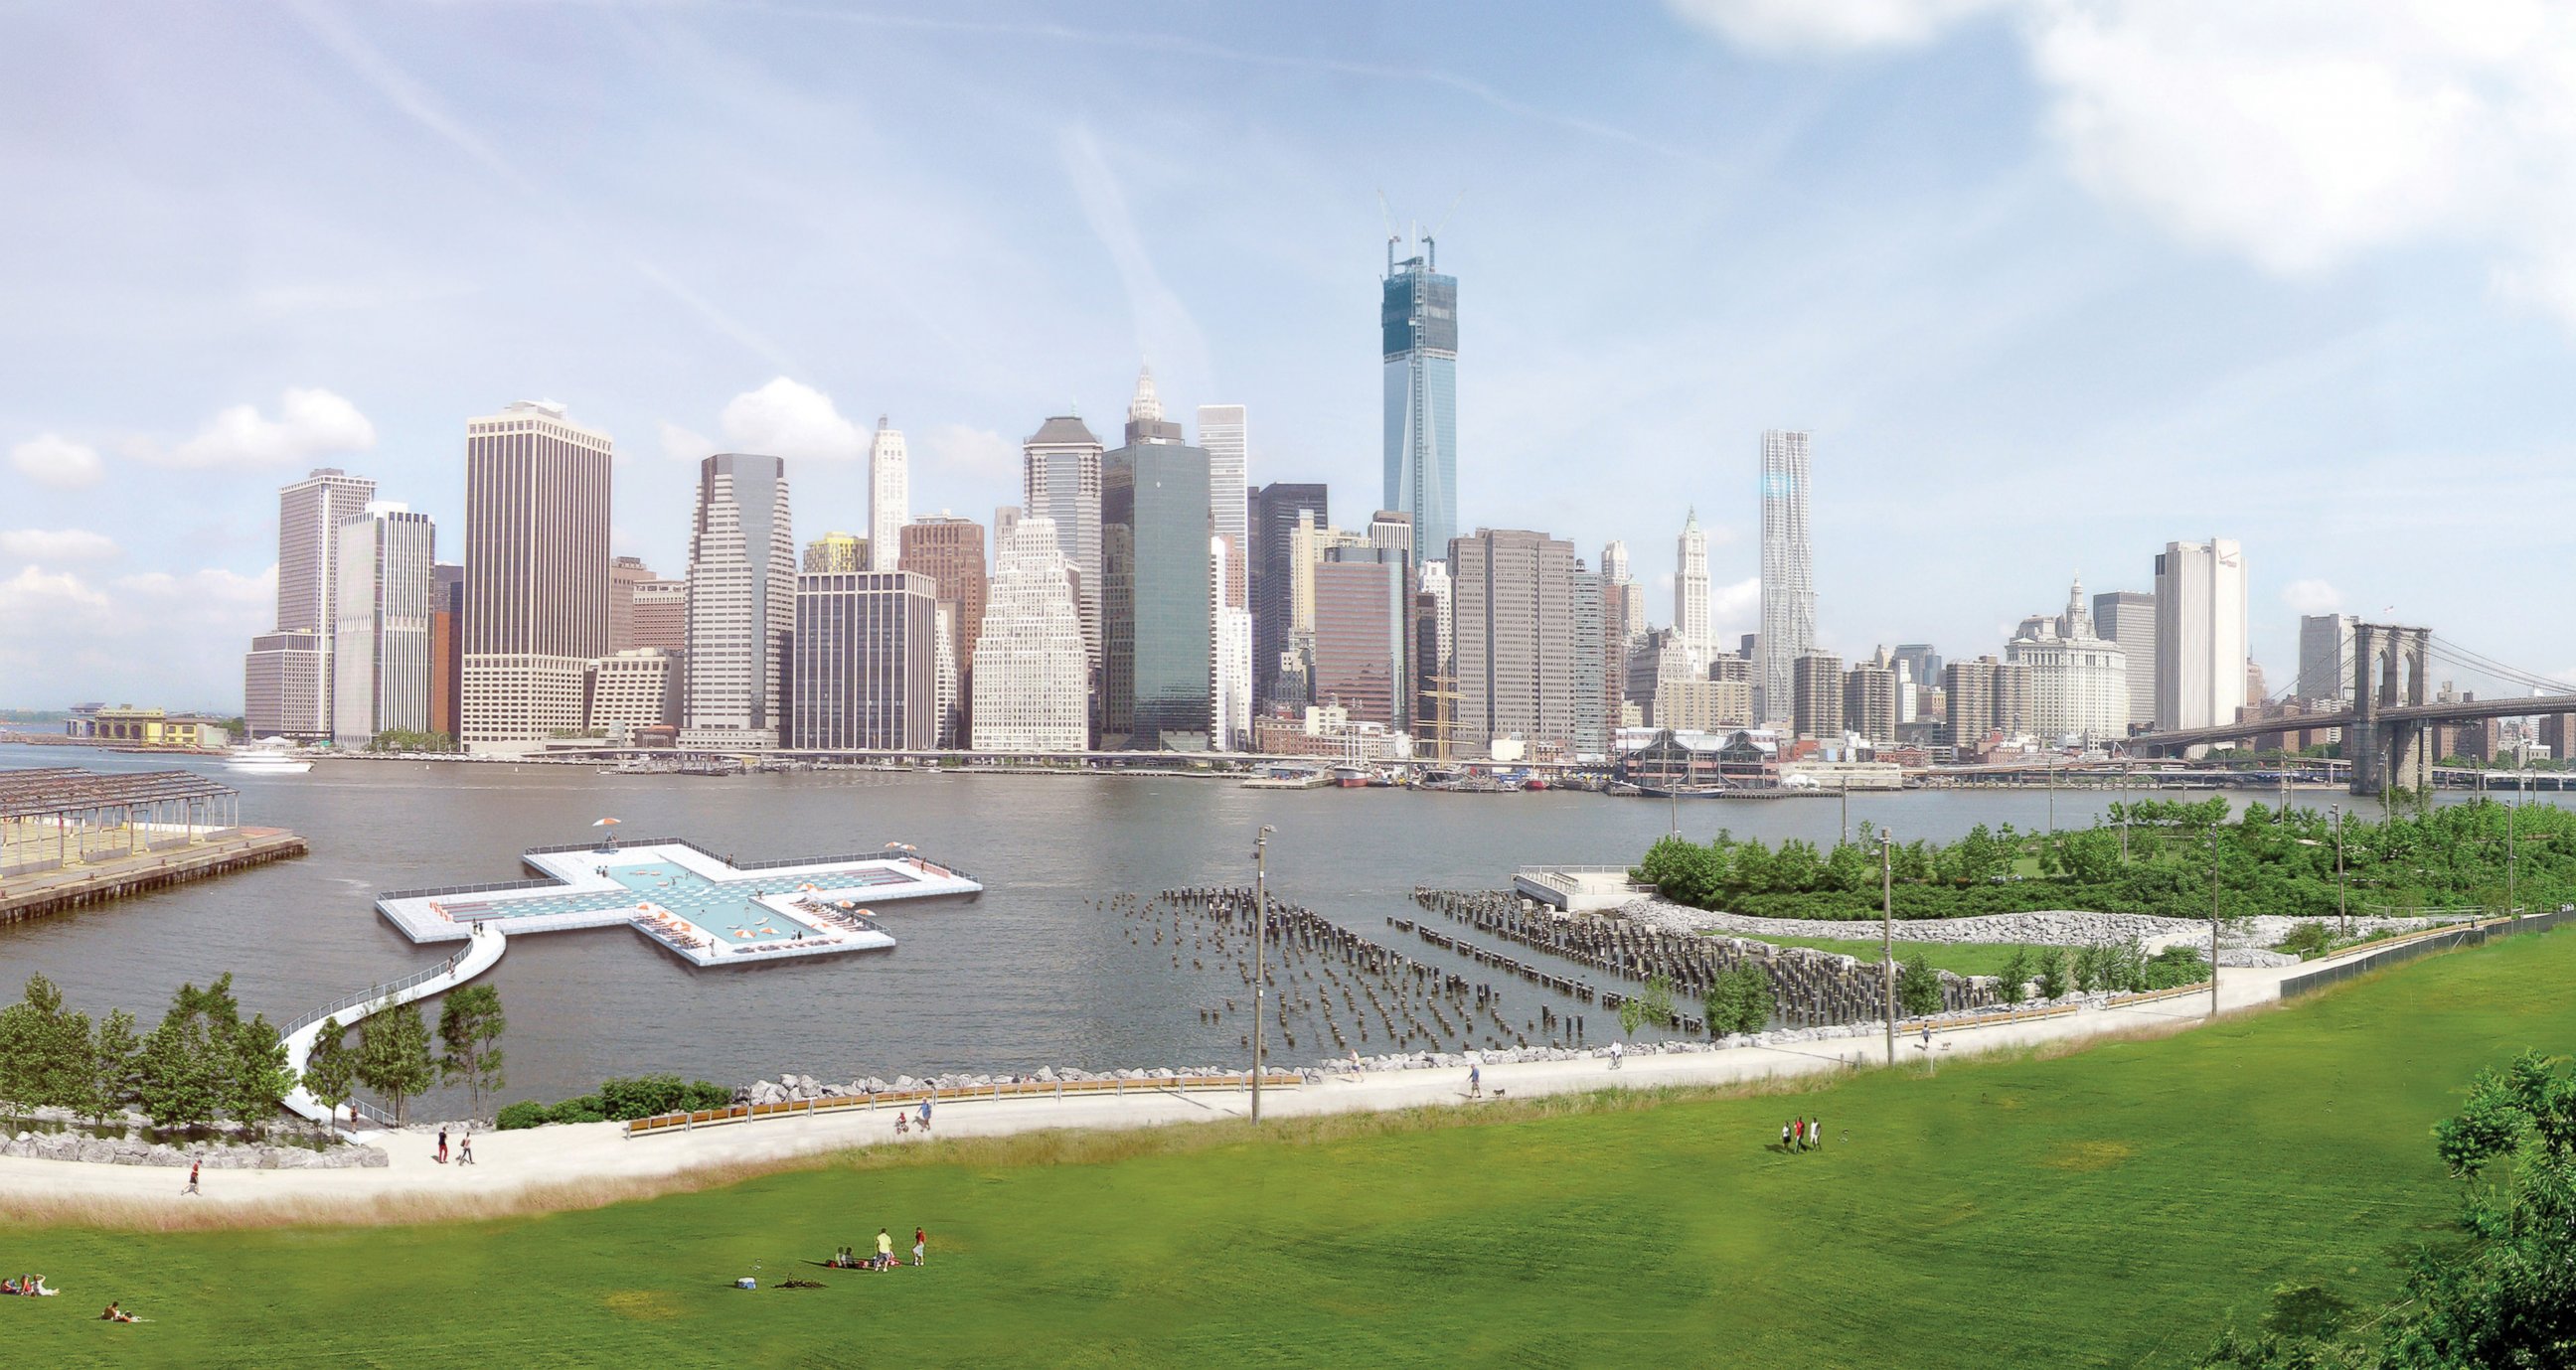 PHOTO: The Plus POOL will filter New York City's East River to make it swimmable.